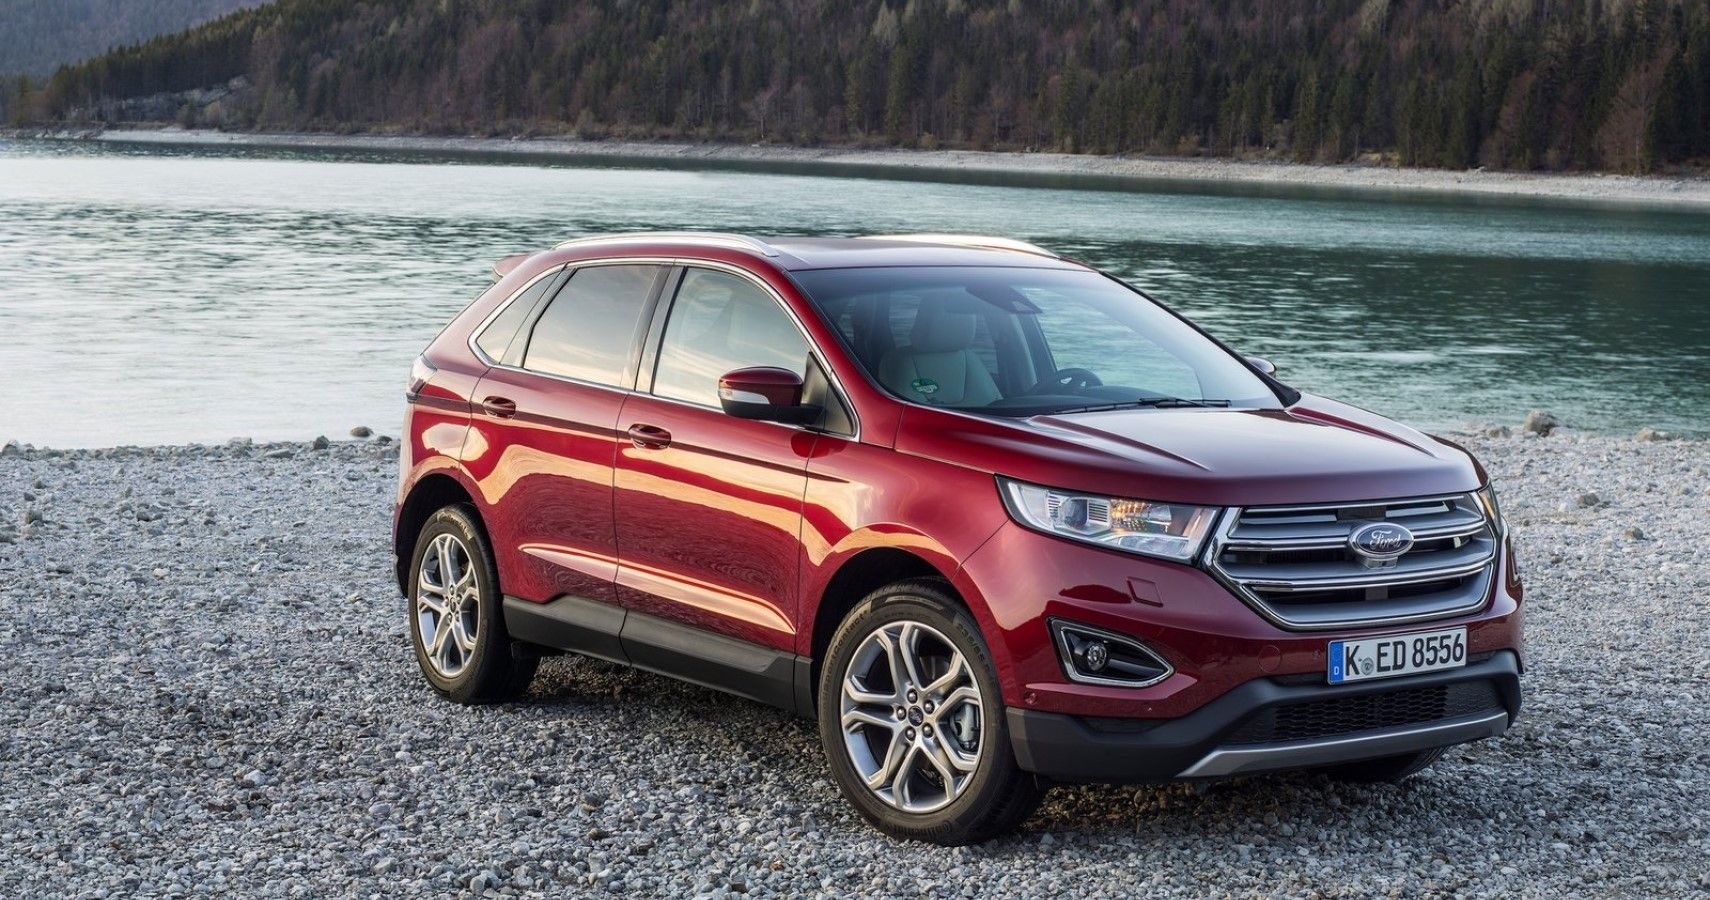 2018 Ford Edge in red besides a lake hd car view